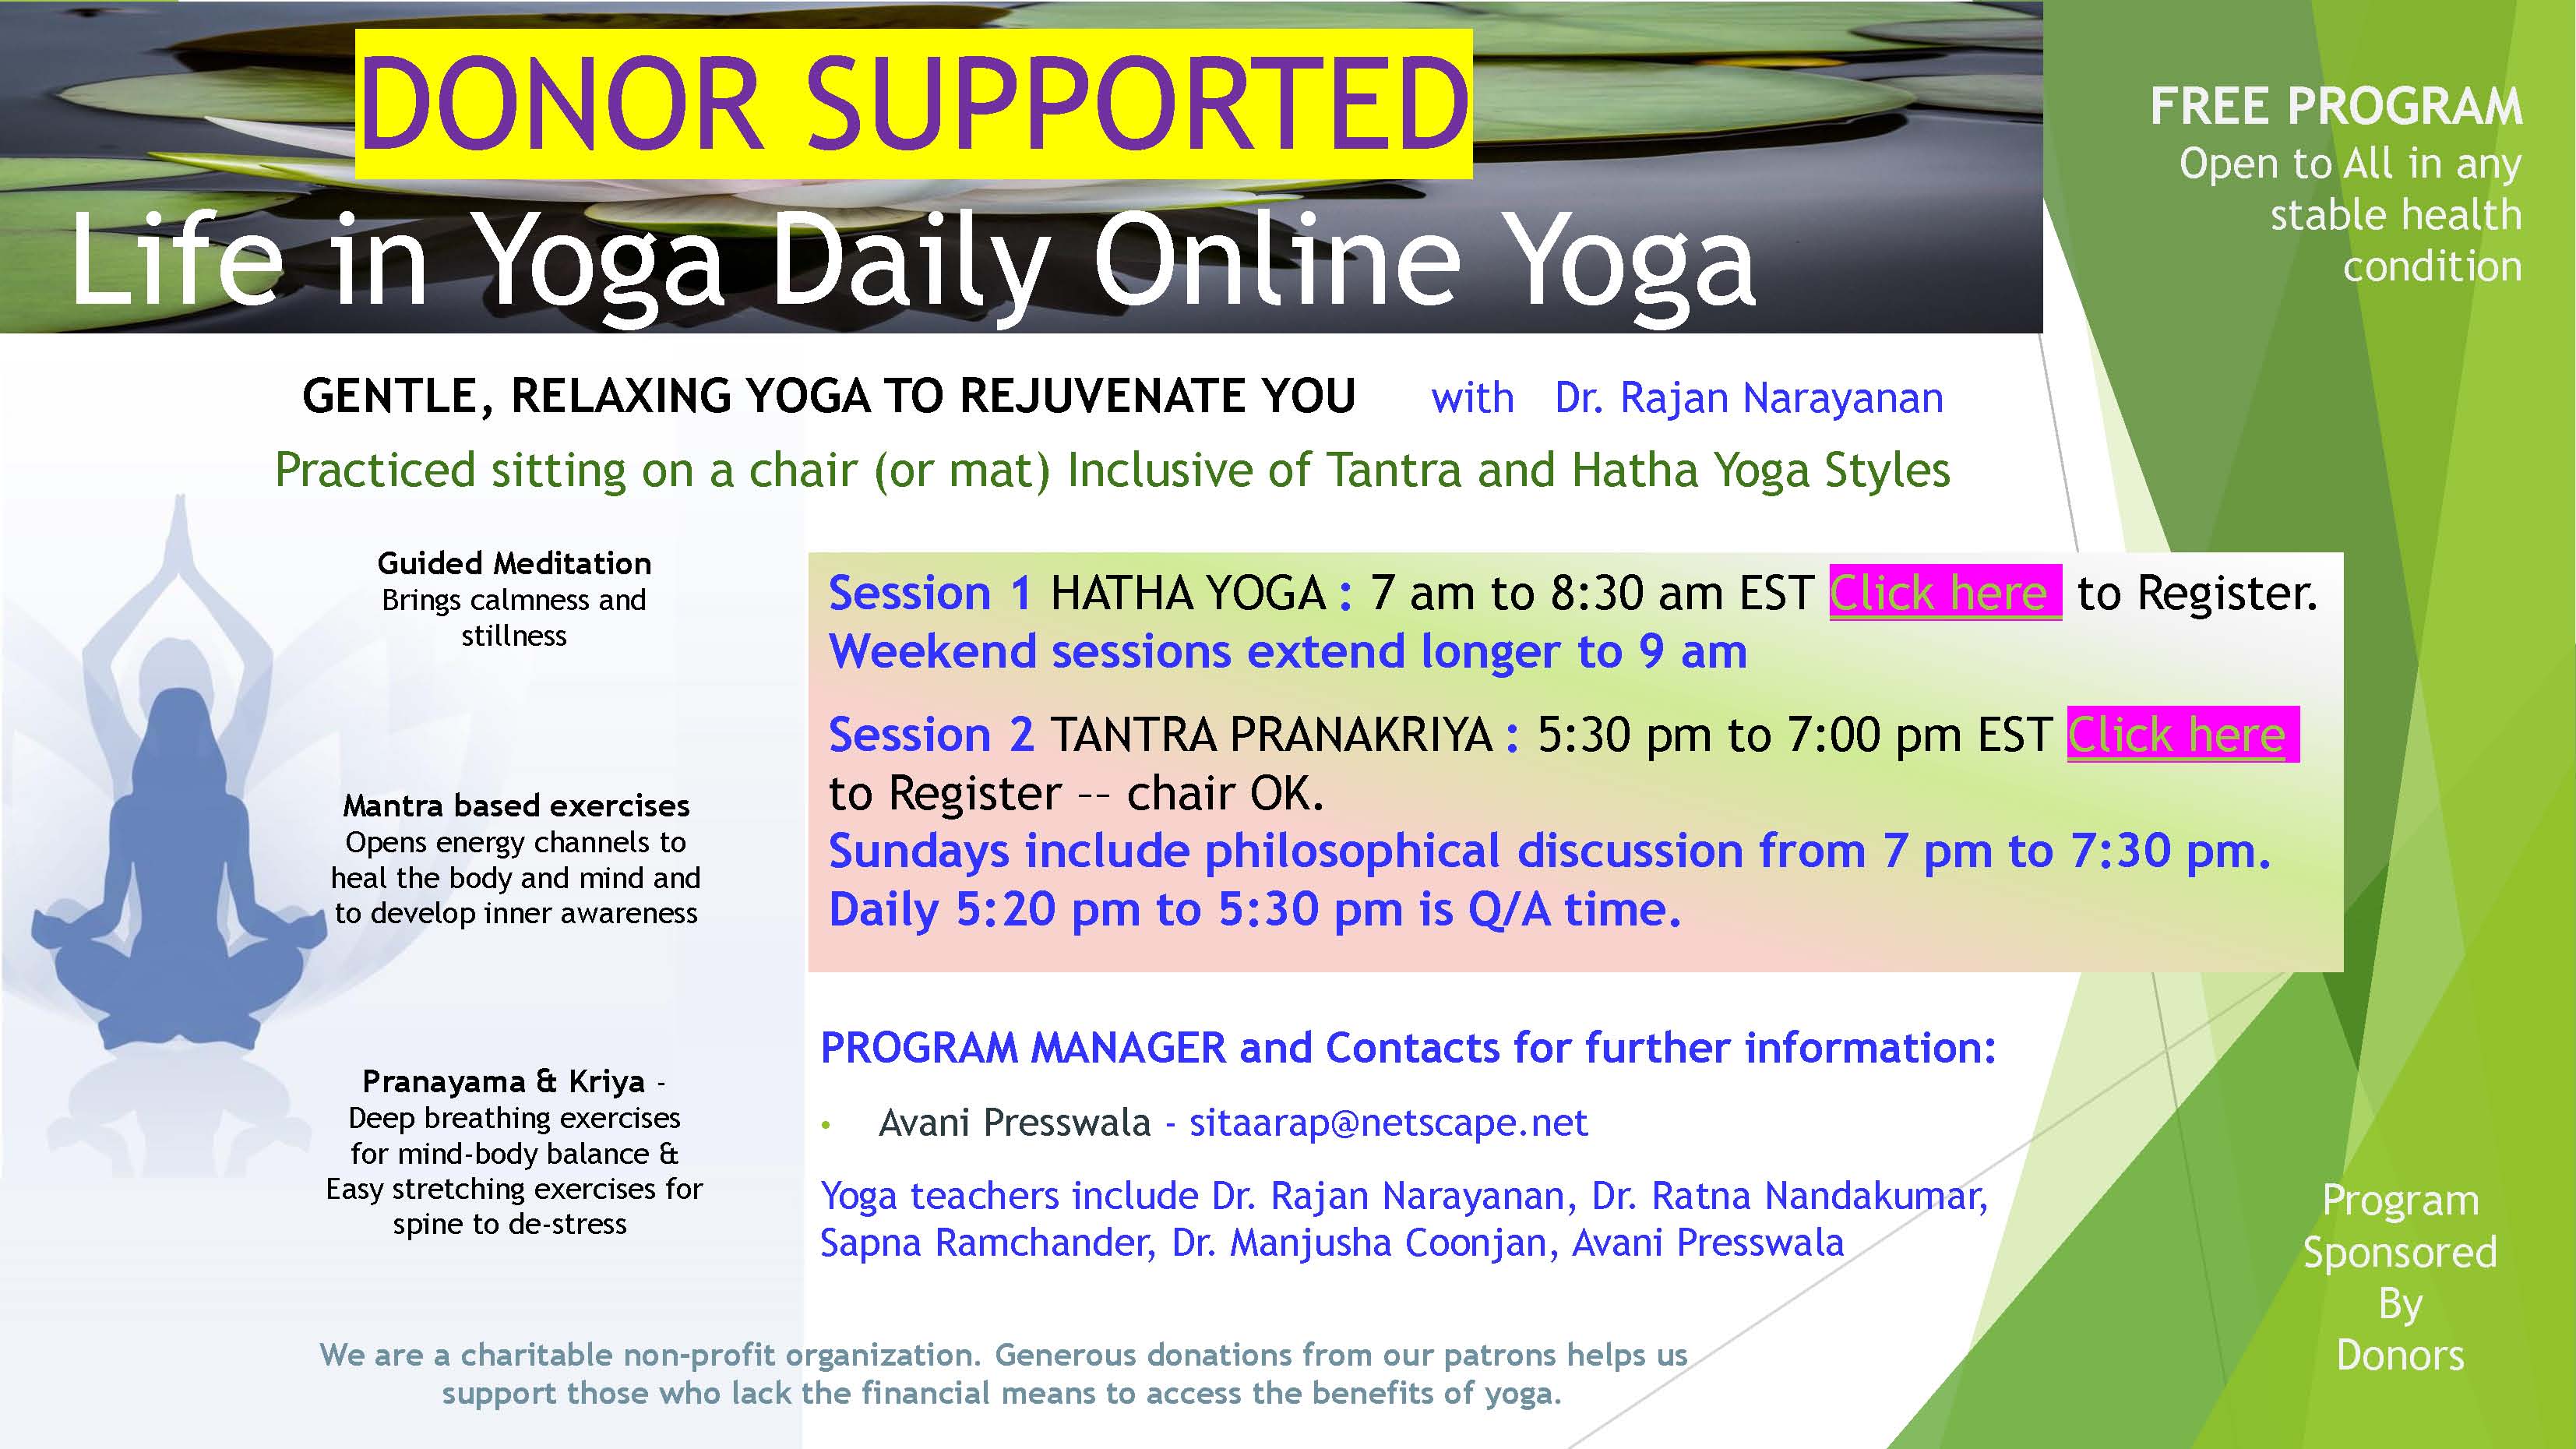 Daily Online Yoga